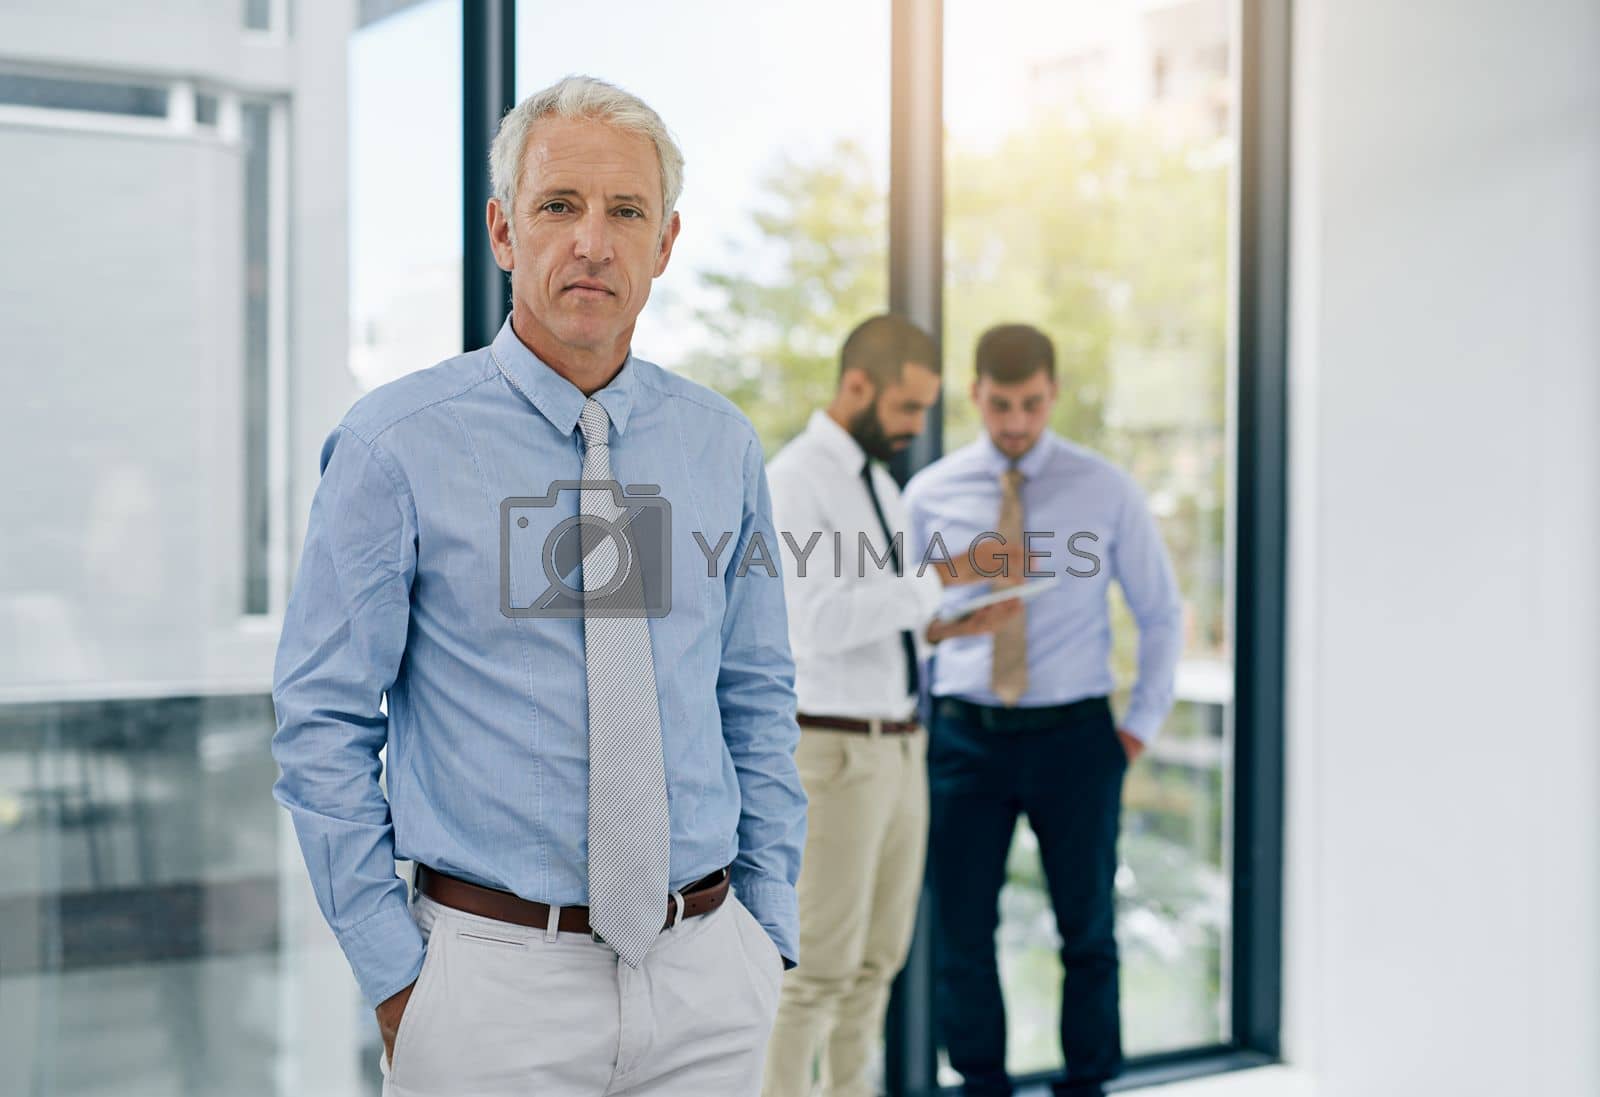 Royalty free image of We share the same ambitious drive. Portrait of a mature businessman standing in an office with colleagues in the background. by YuriArcurs